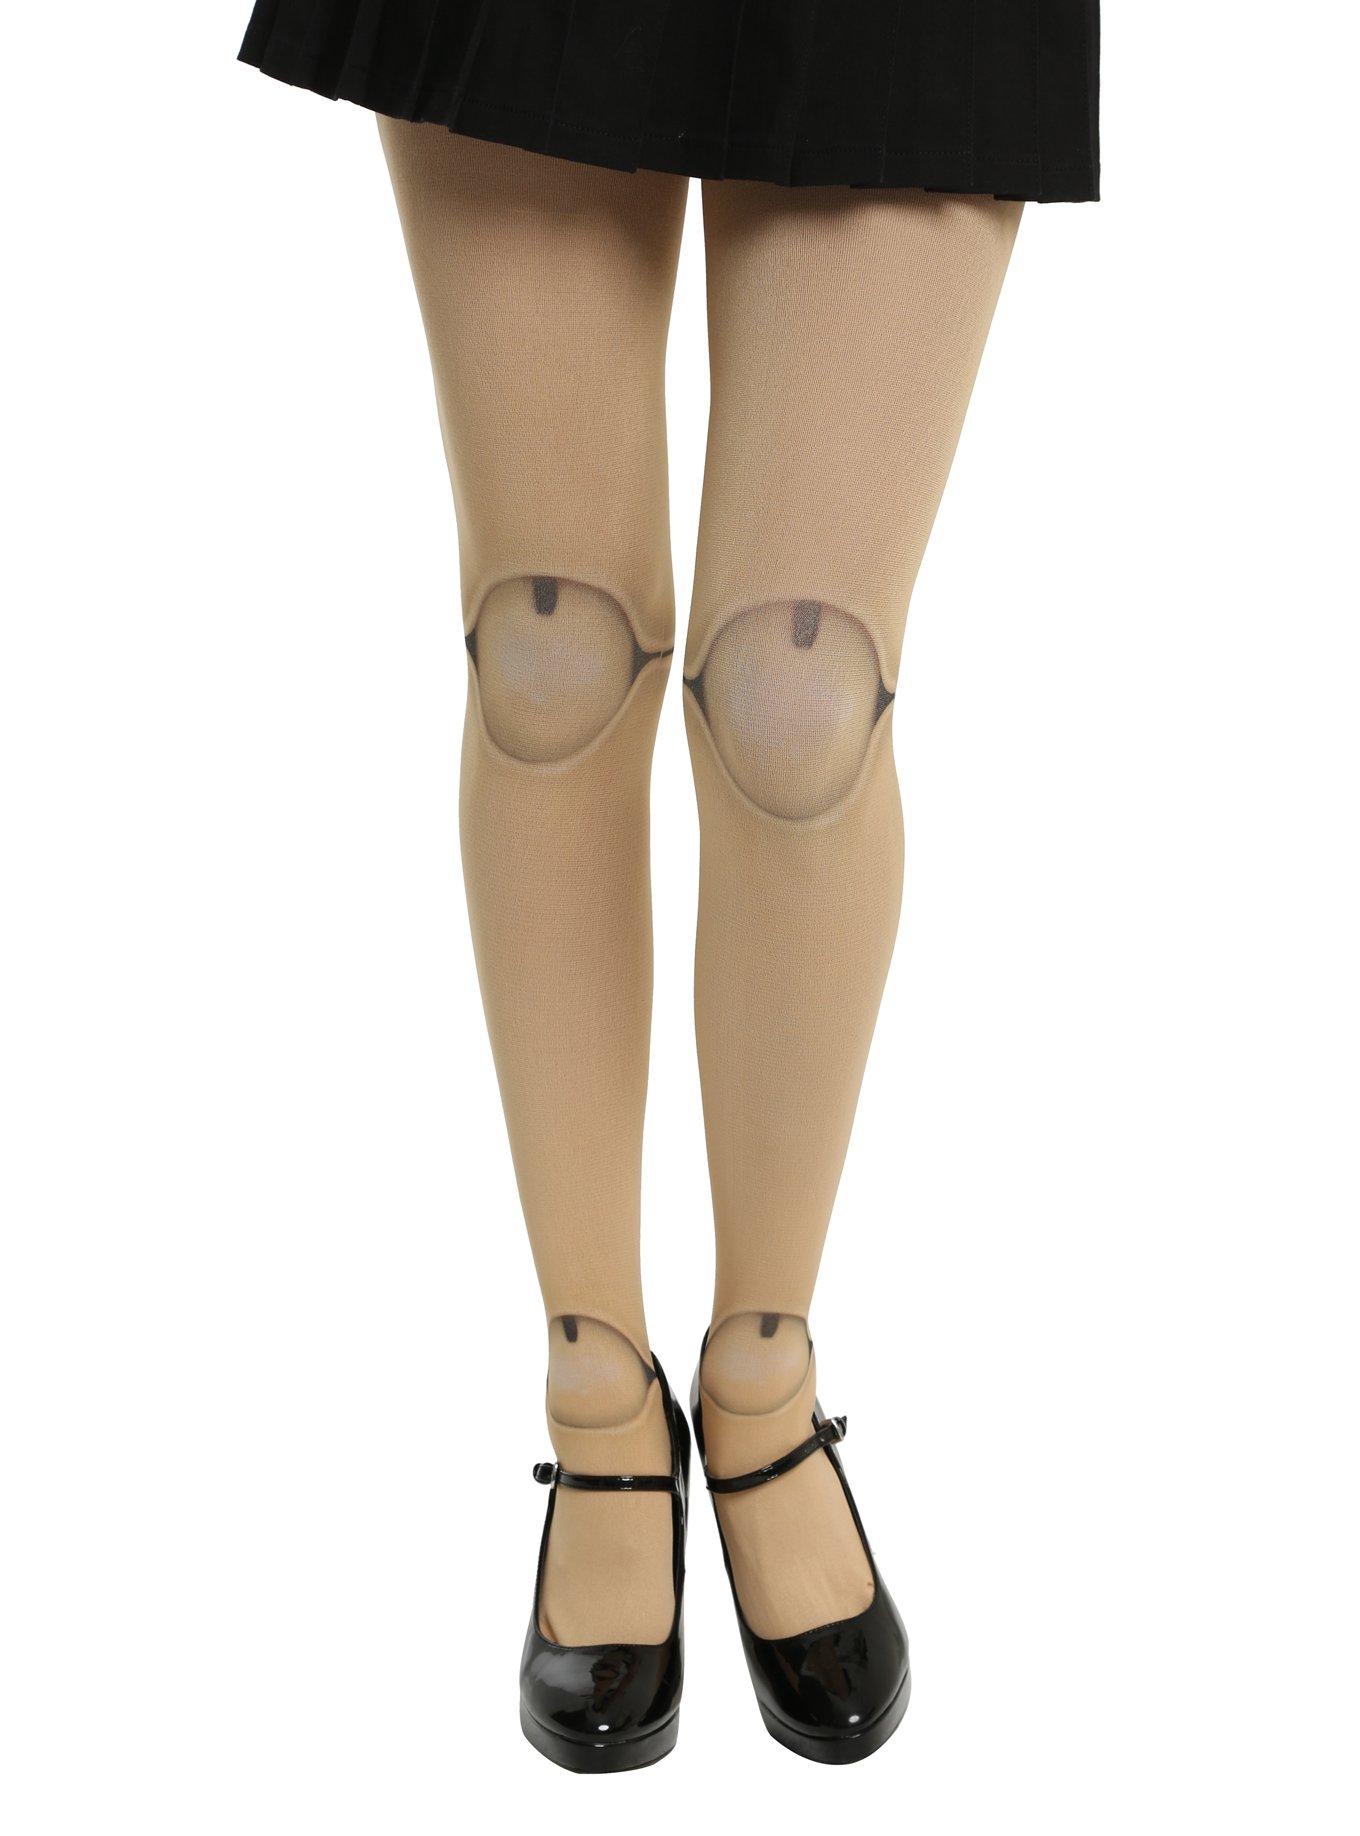 Hot Topic - The purrfect pair of tights!